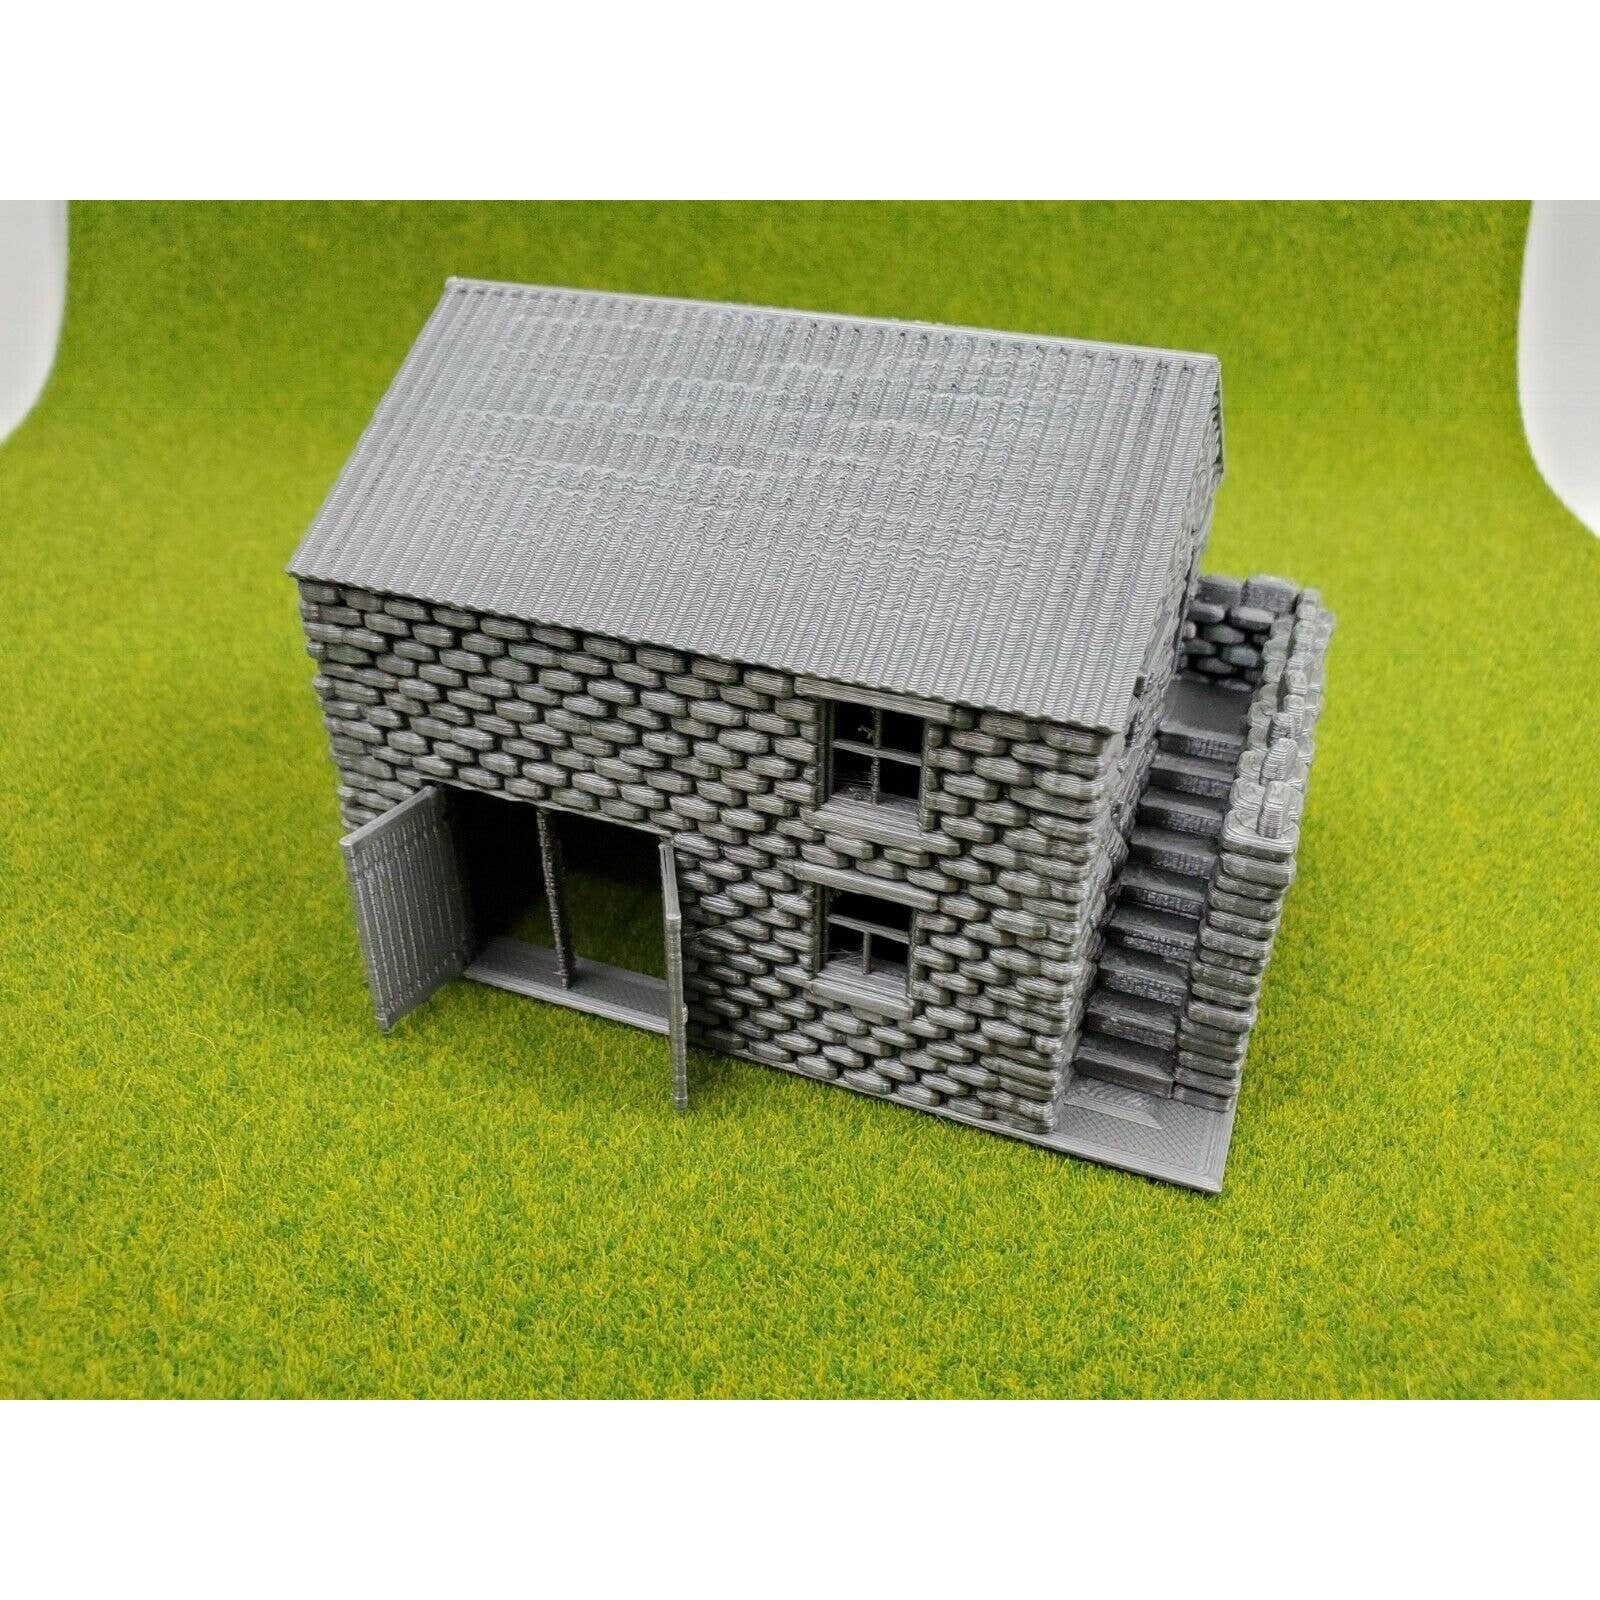 HO Scale Building Store 1:87 Scale Print Etsy